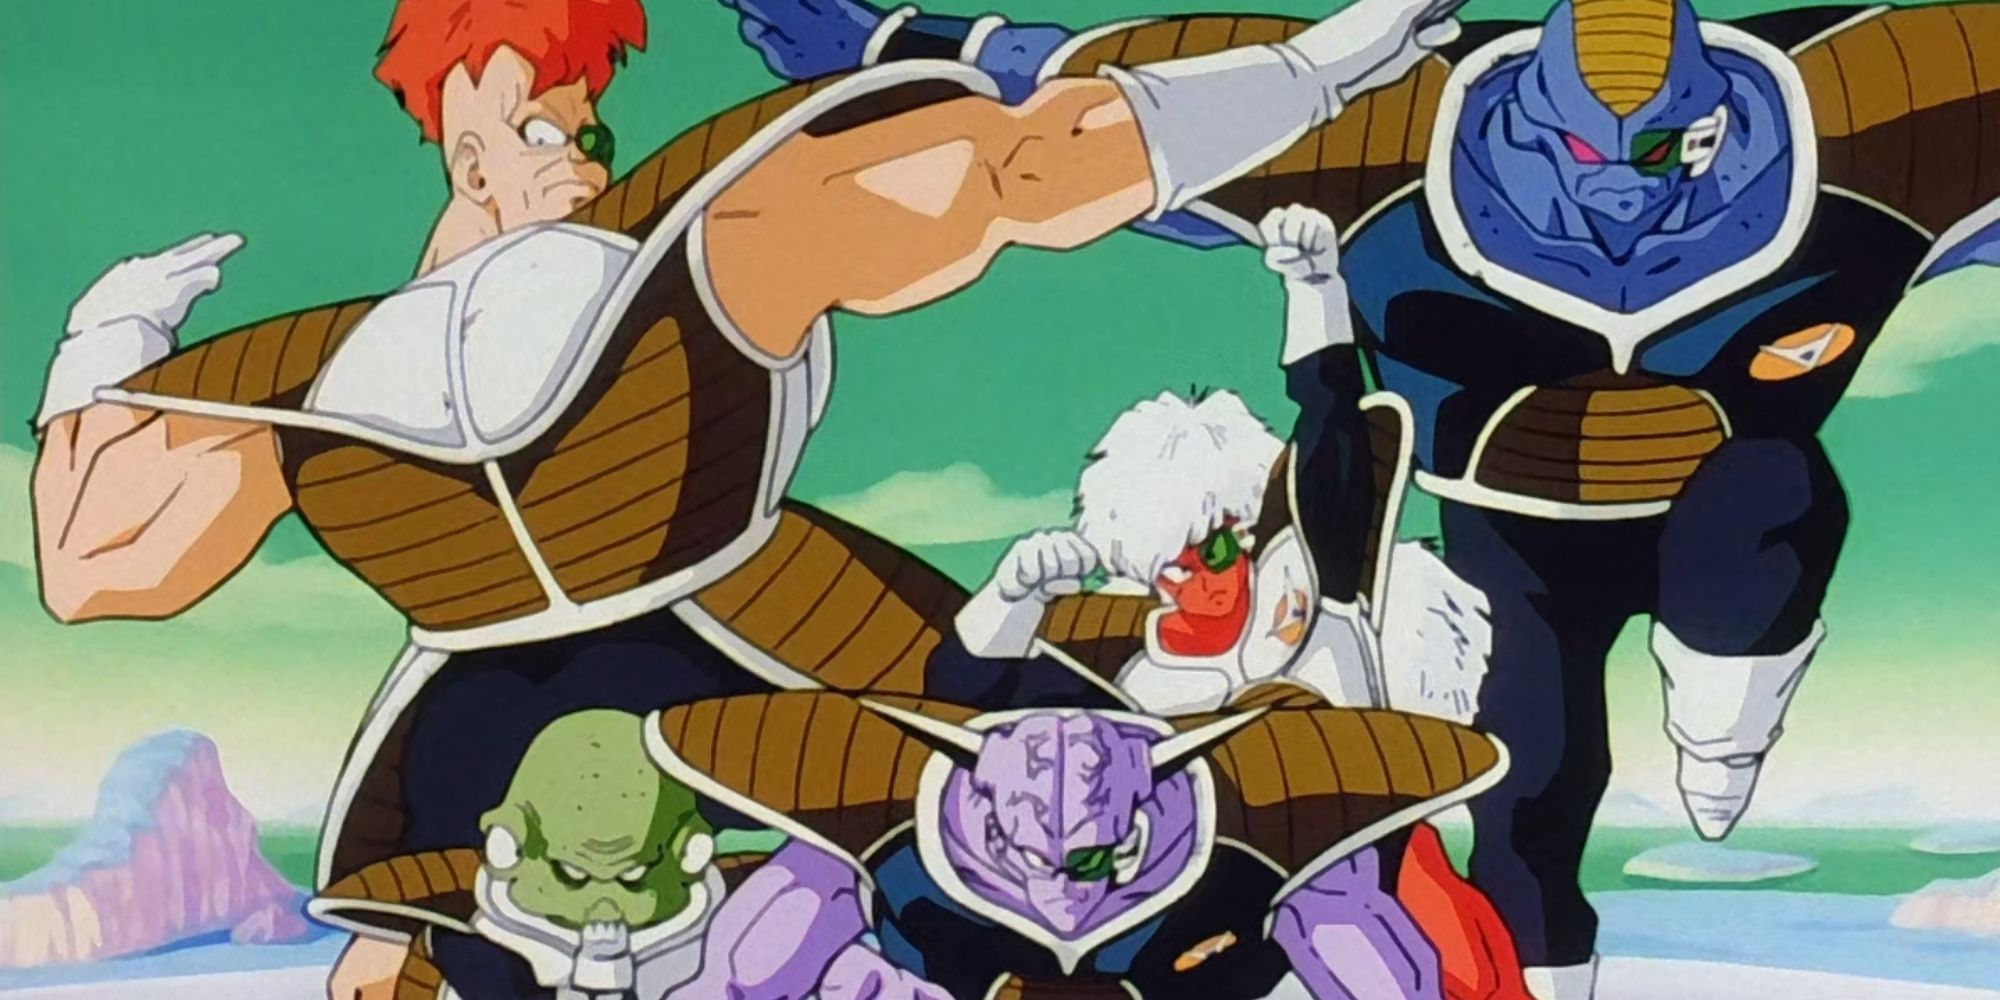 The Ginyu Force posing in Dragon Ball Z